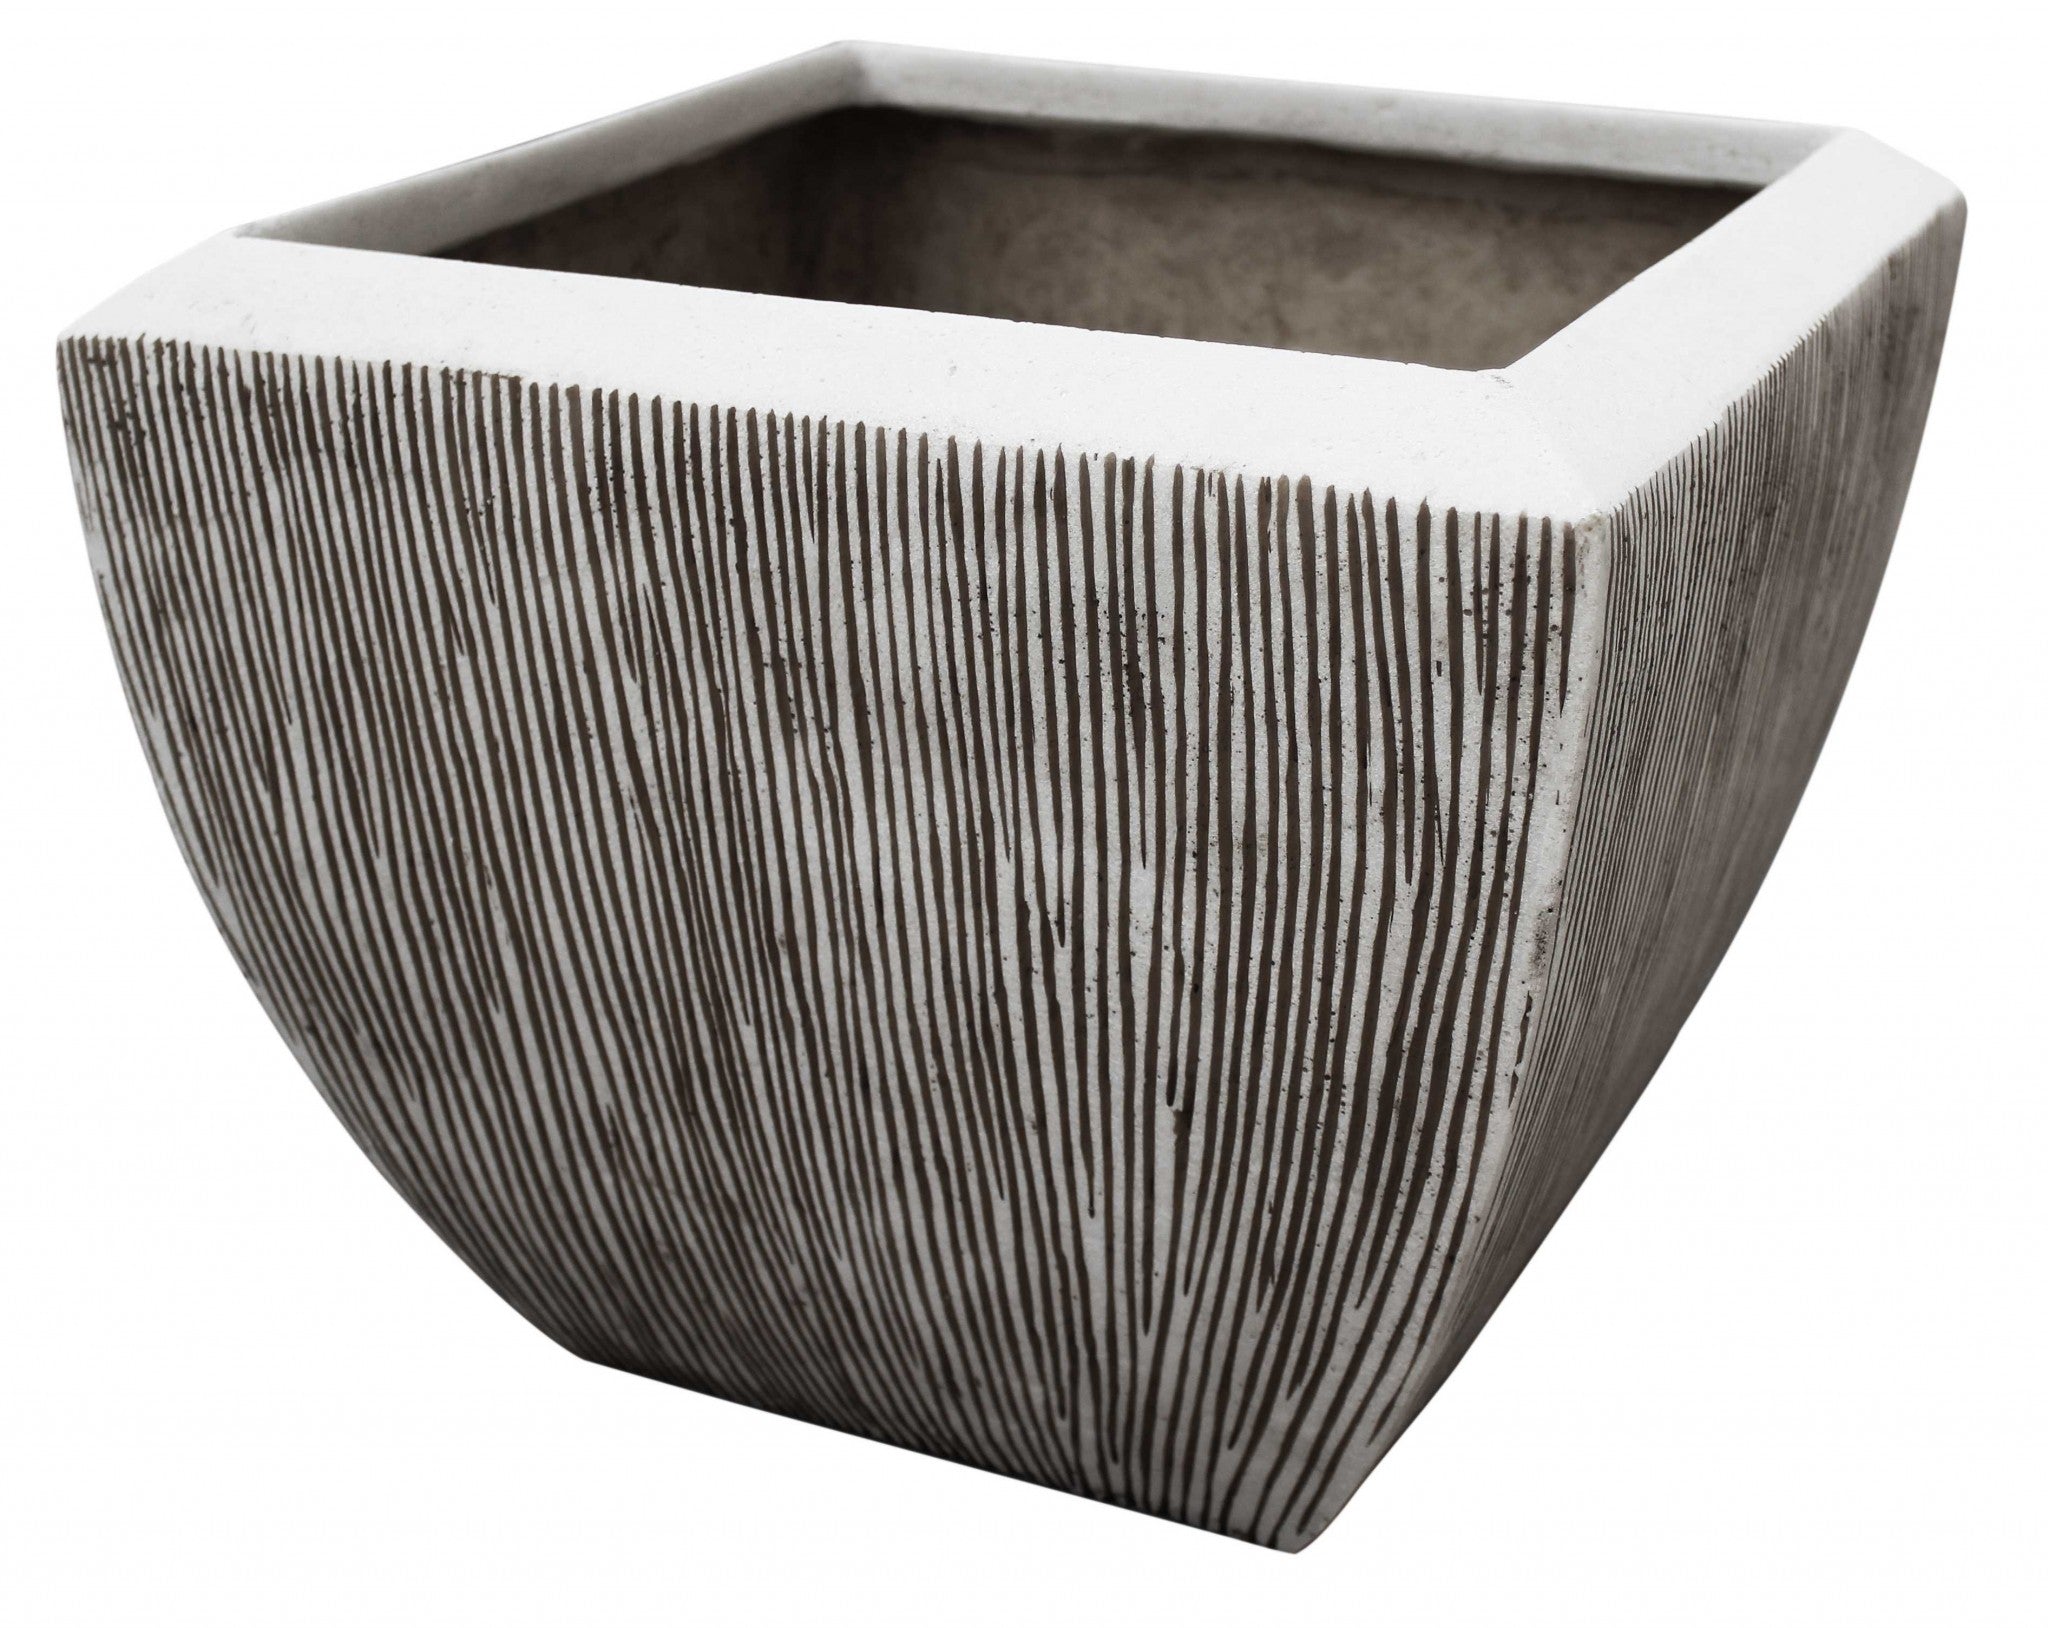 Large Distressed And Ribbed Flower Pot Planter